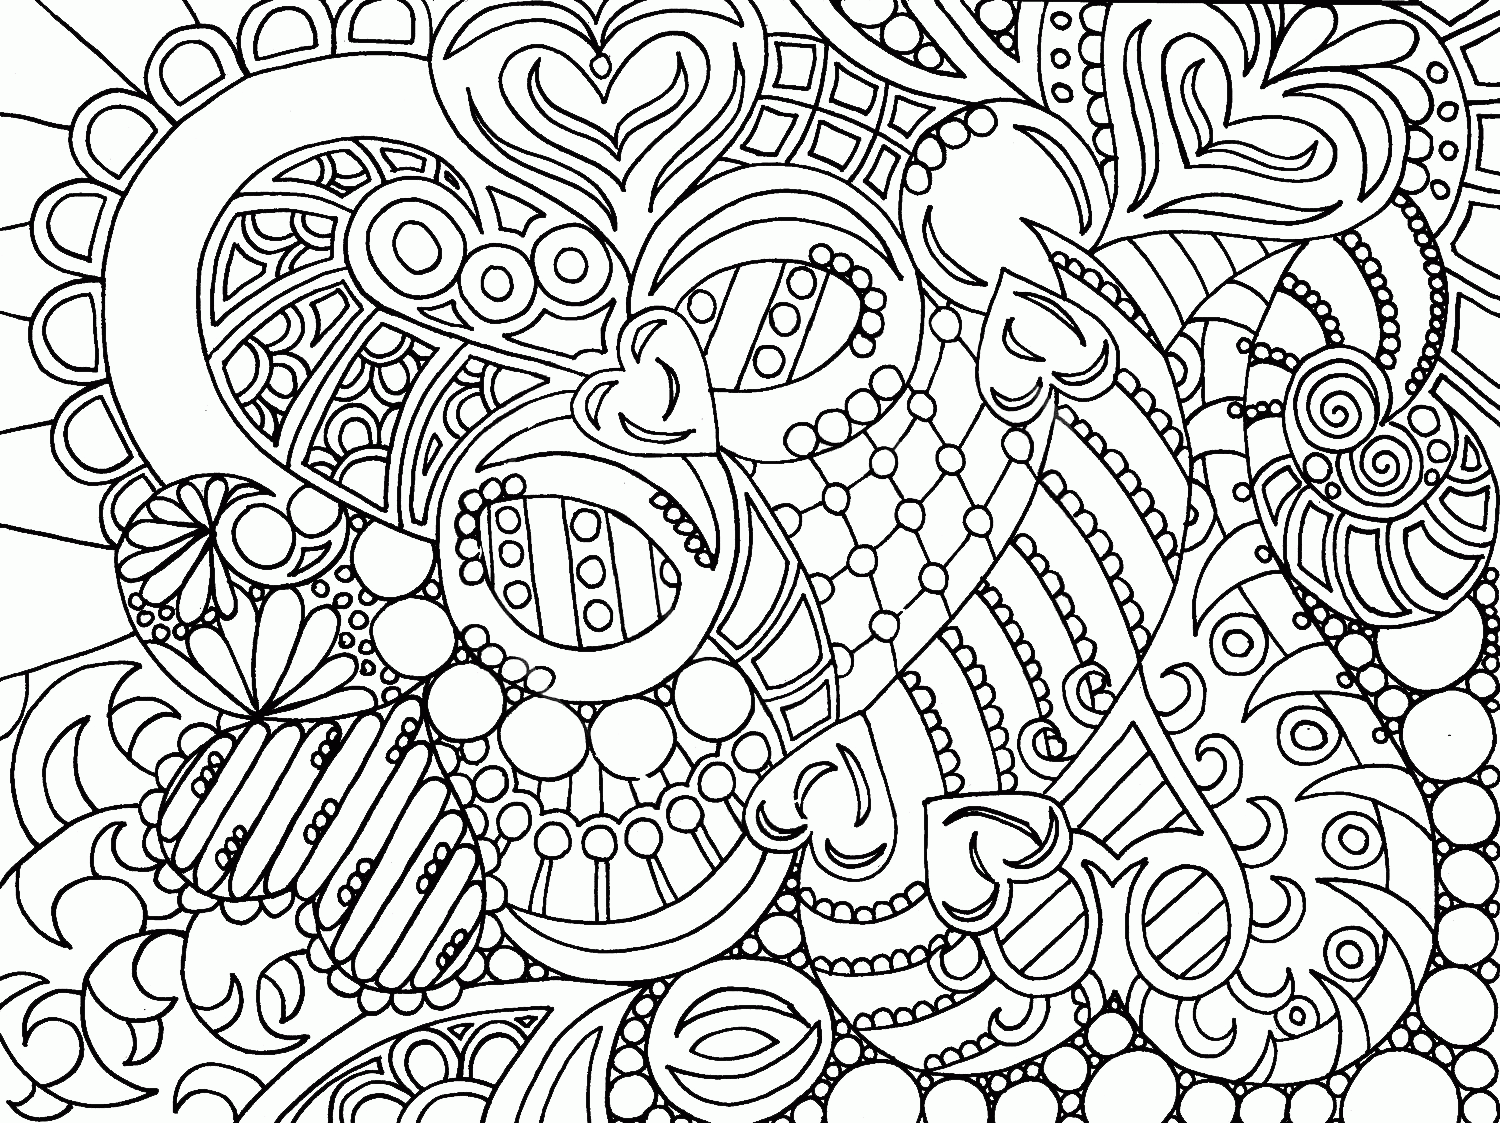 Free Coloring Pages For Adults Abstract Flowers Download Free Coloring Pages For Adults